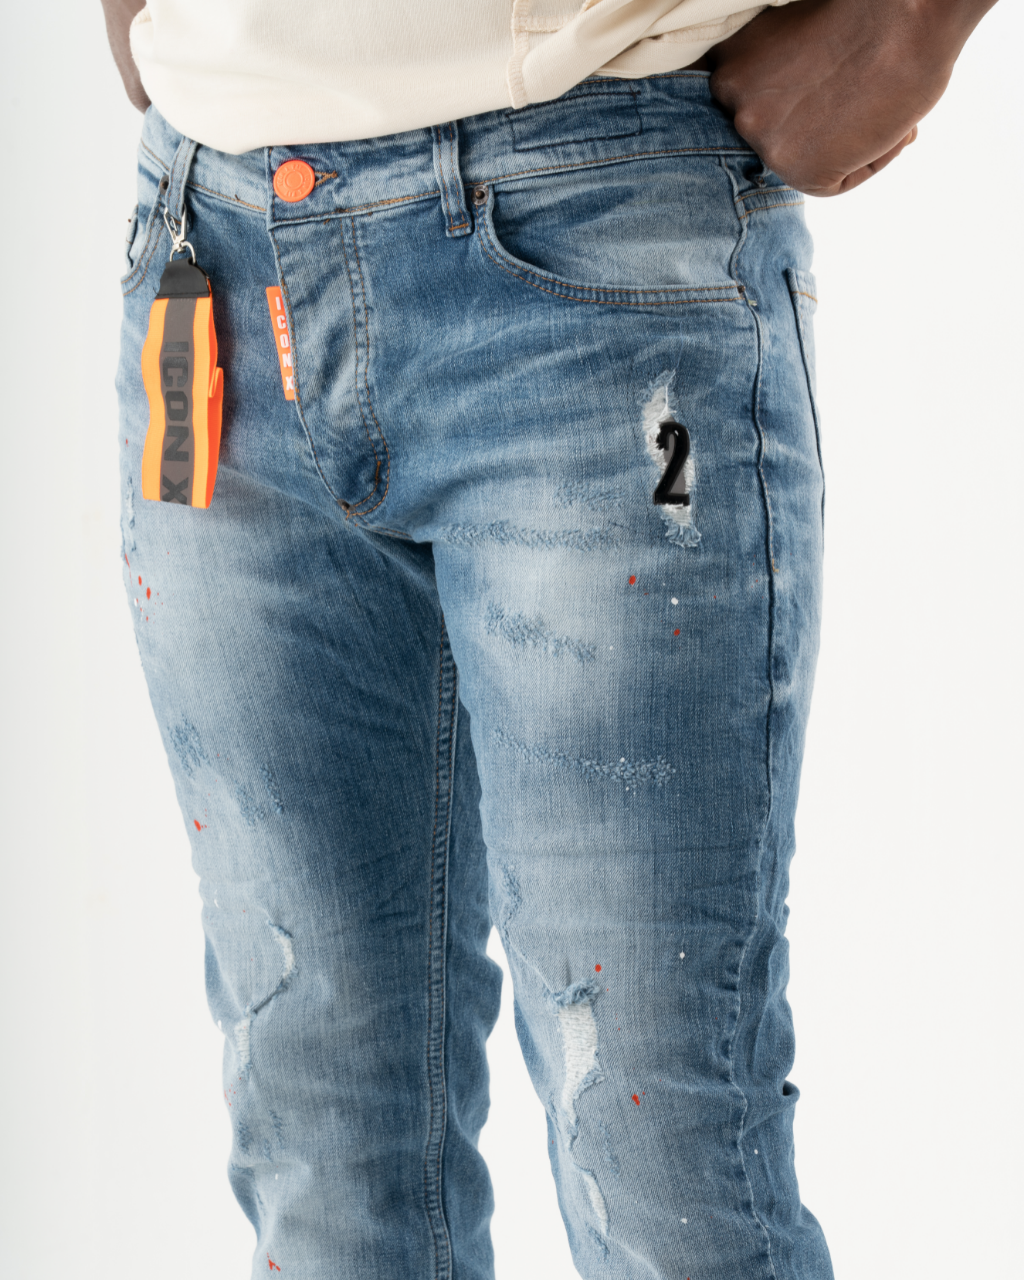 A man is wearing a pair of TEZAR with an orange tag. The jeans have patches and a skinny fit.